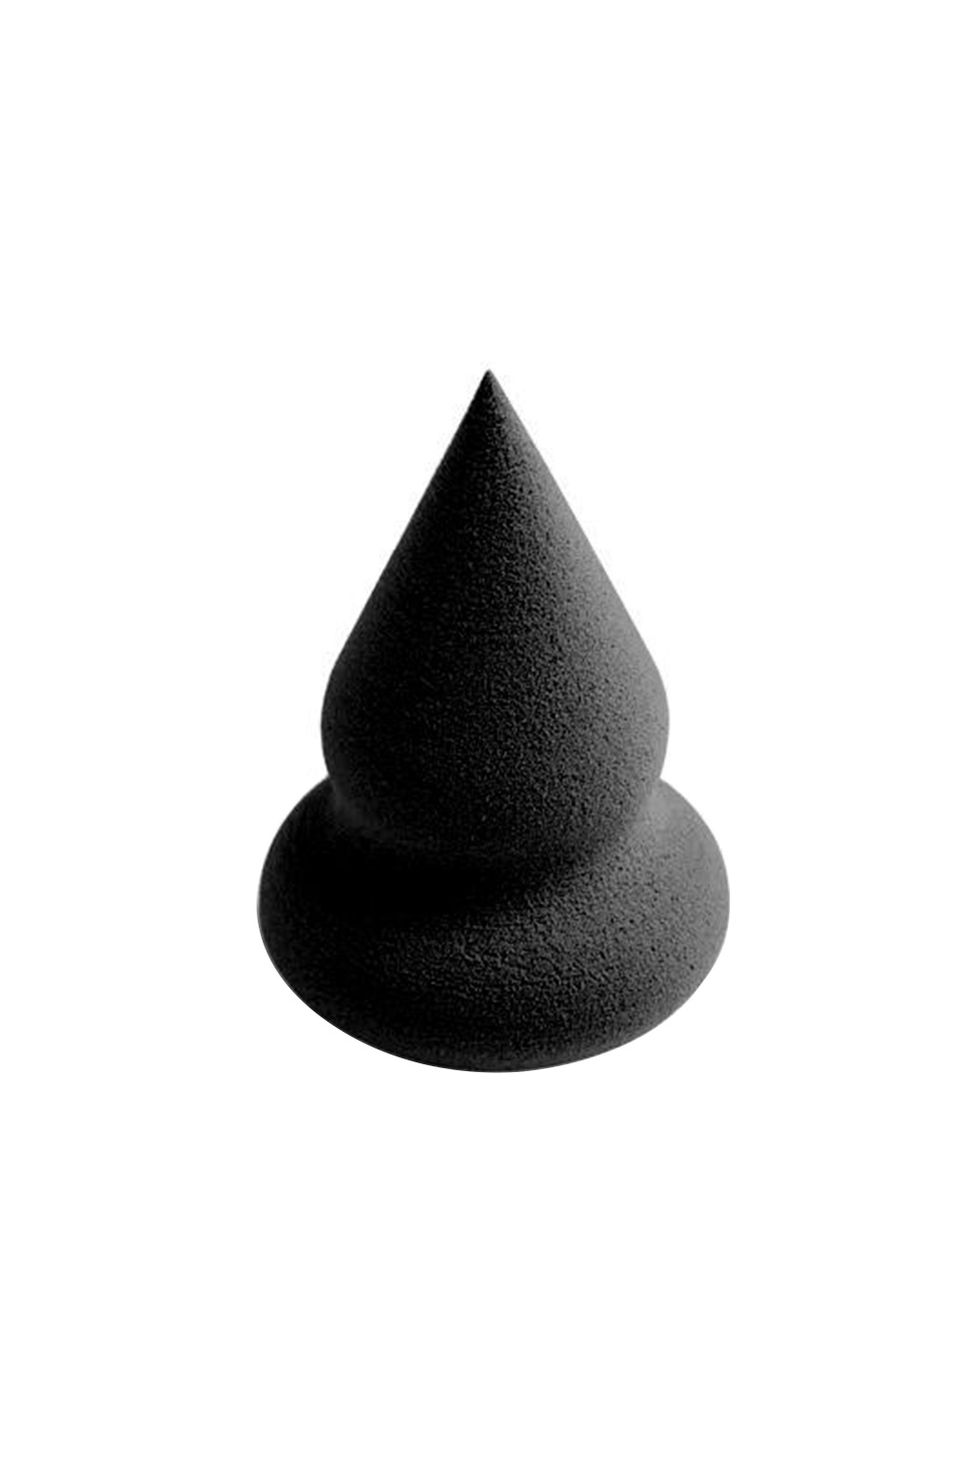 Cone, Hat, Headgear, Costume hat, Witch hat, Fashion accessory, Costume accessory, Black-and-white, Fedora, 